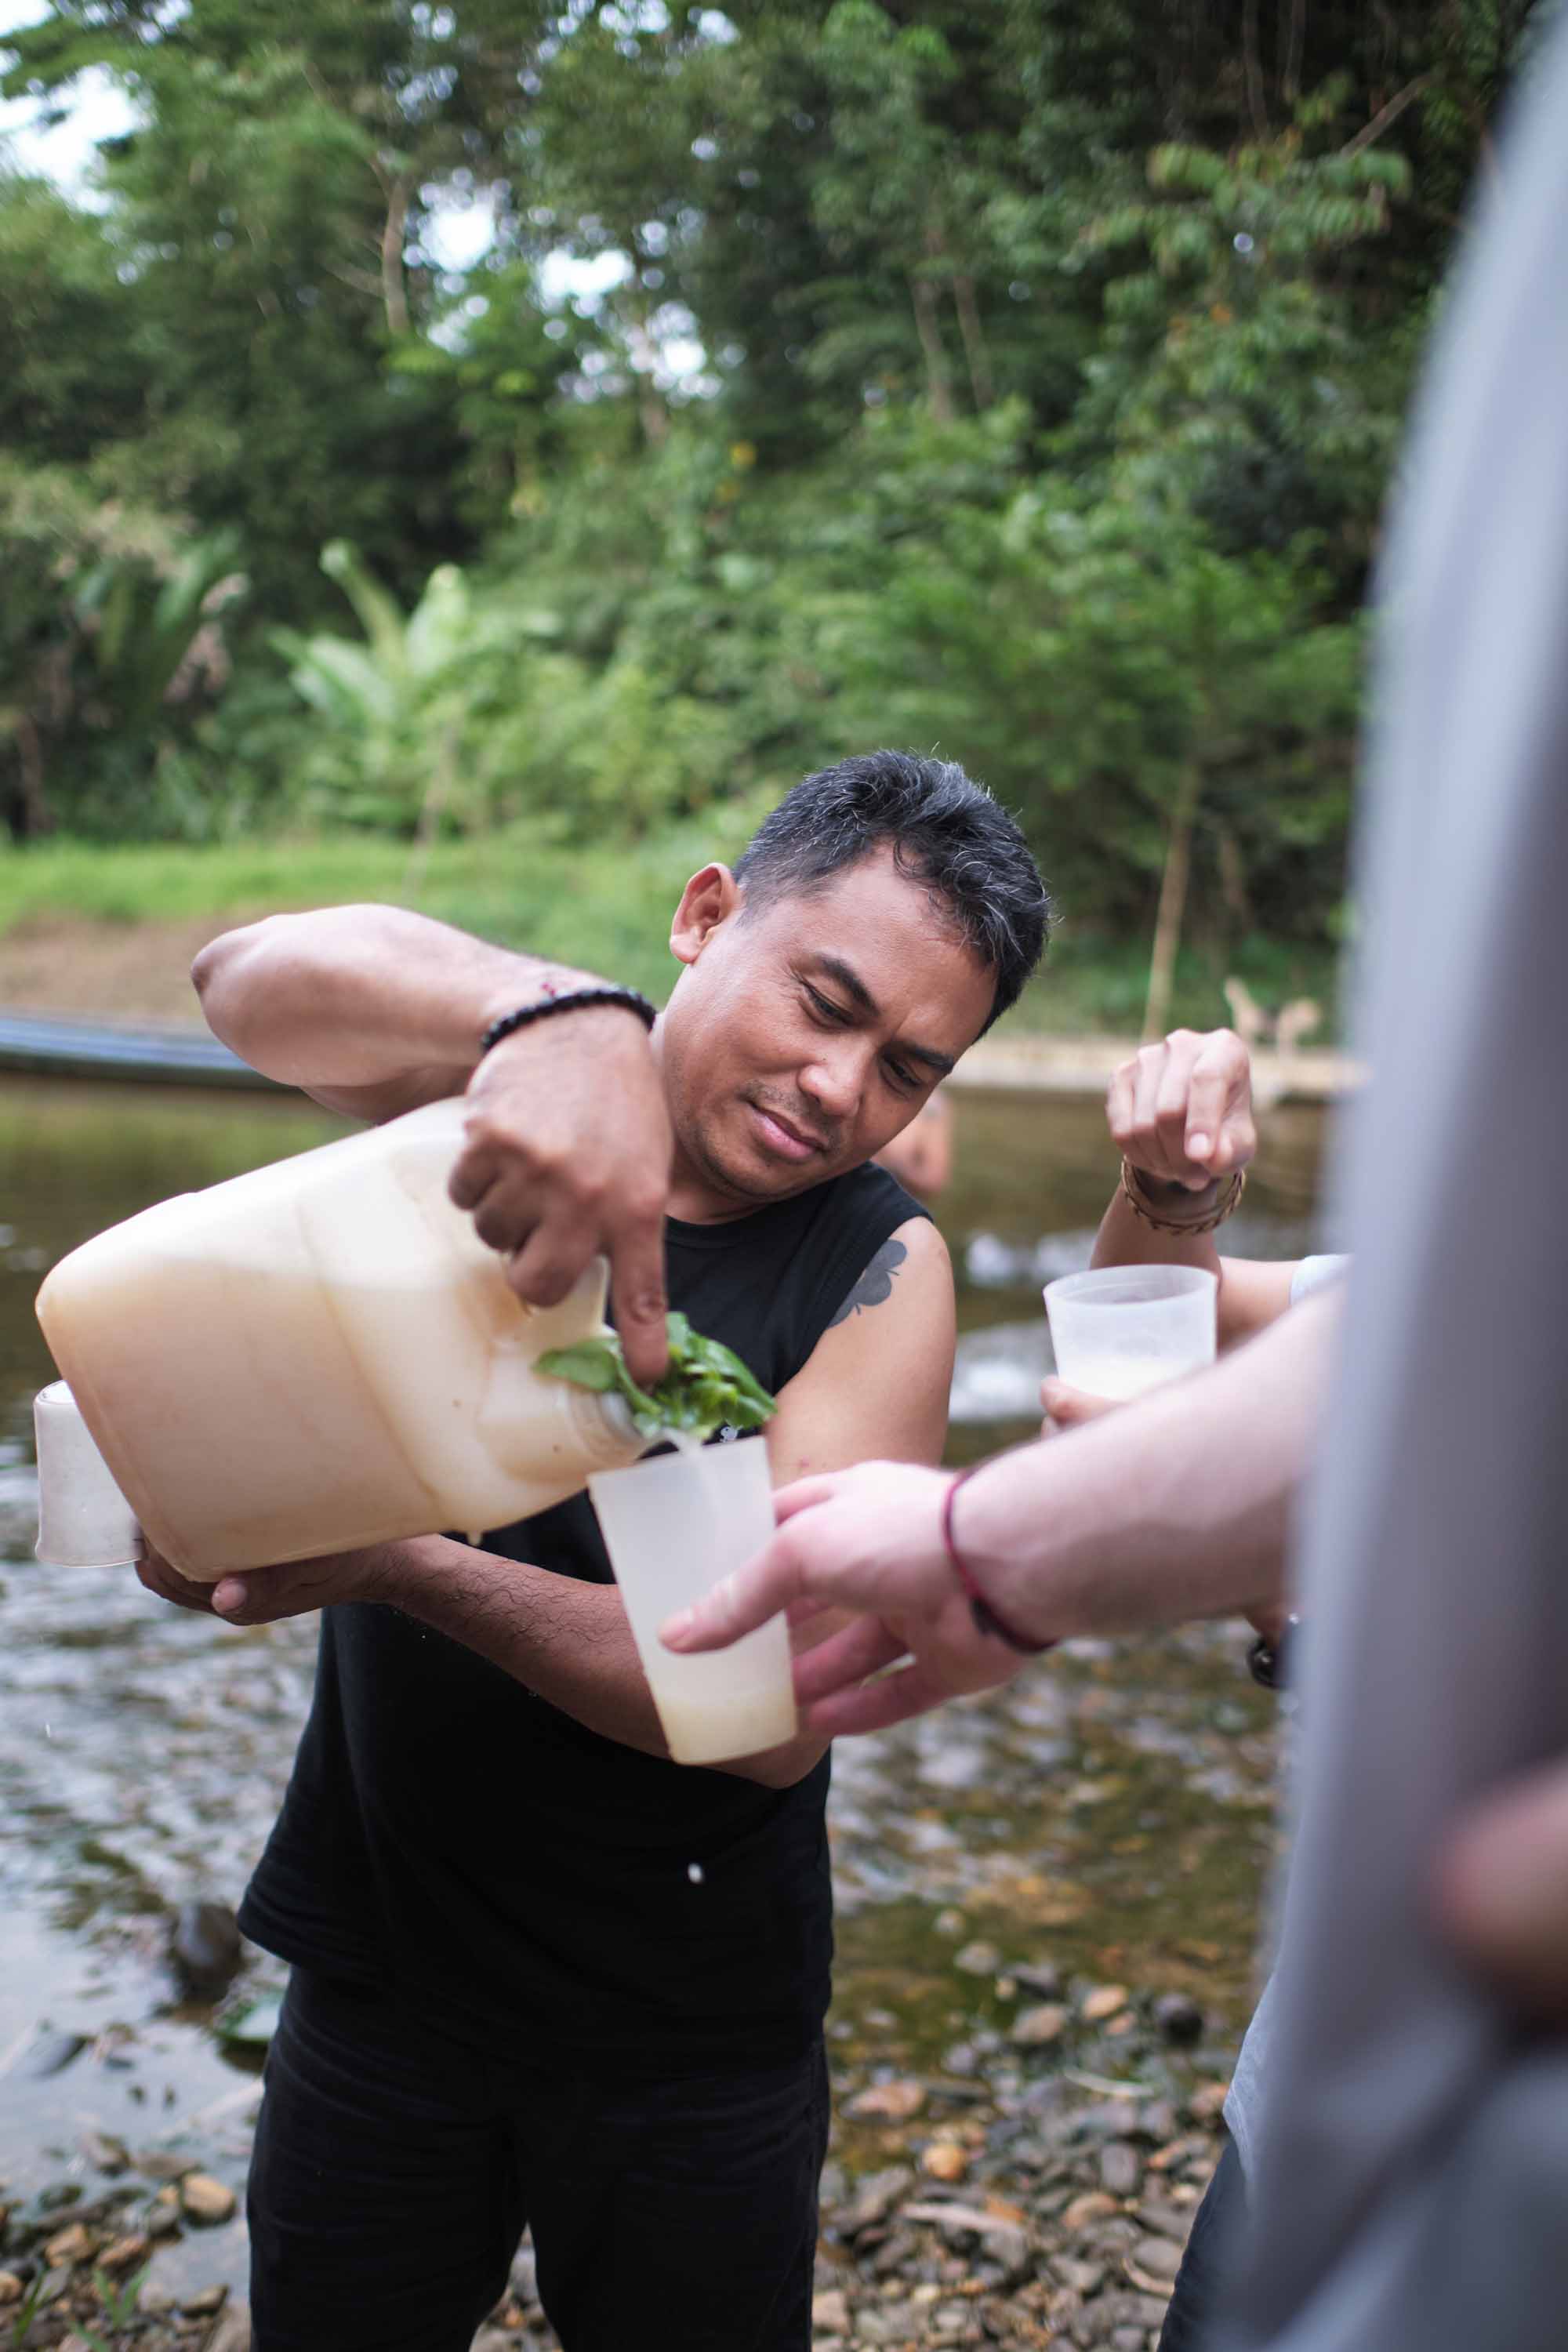 A man standing in a stream in black shirt and jeans pours a white drink from a jug to a hand holding a cup